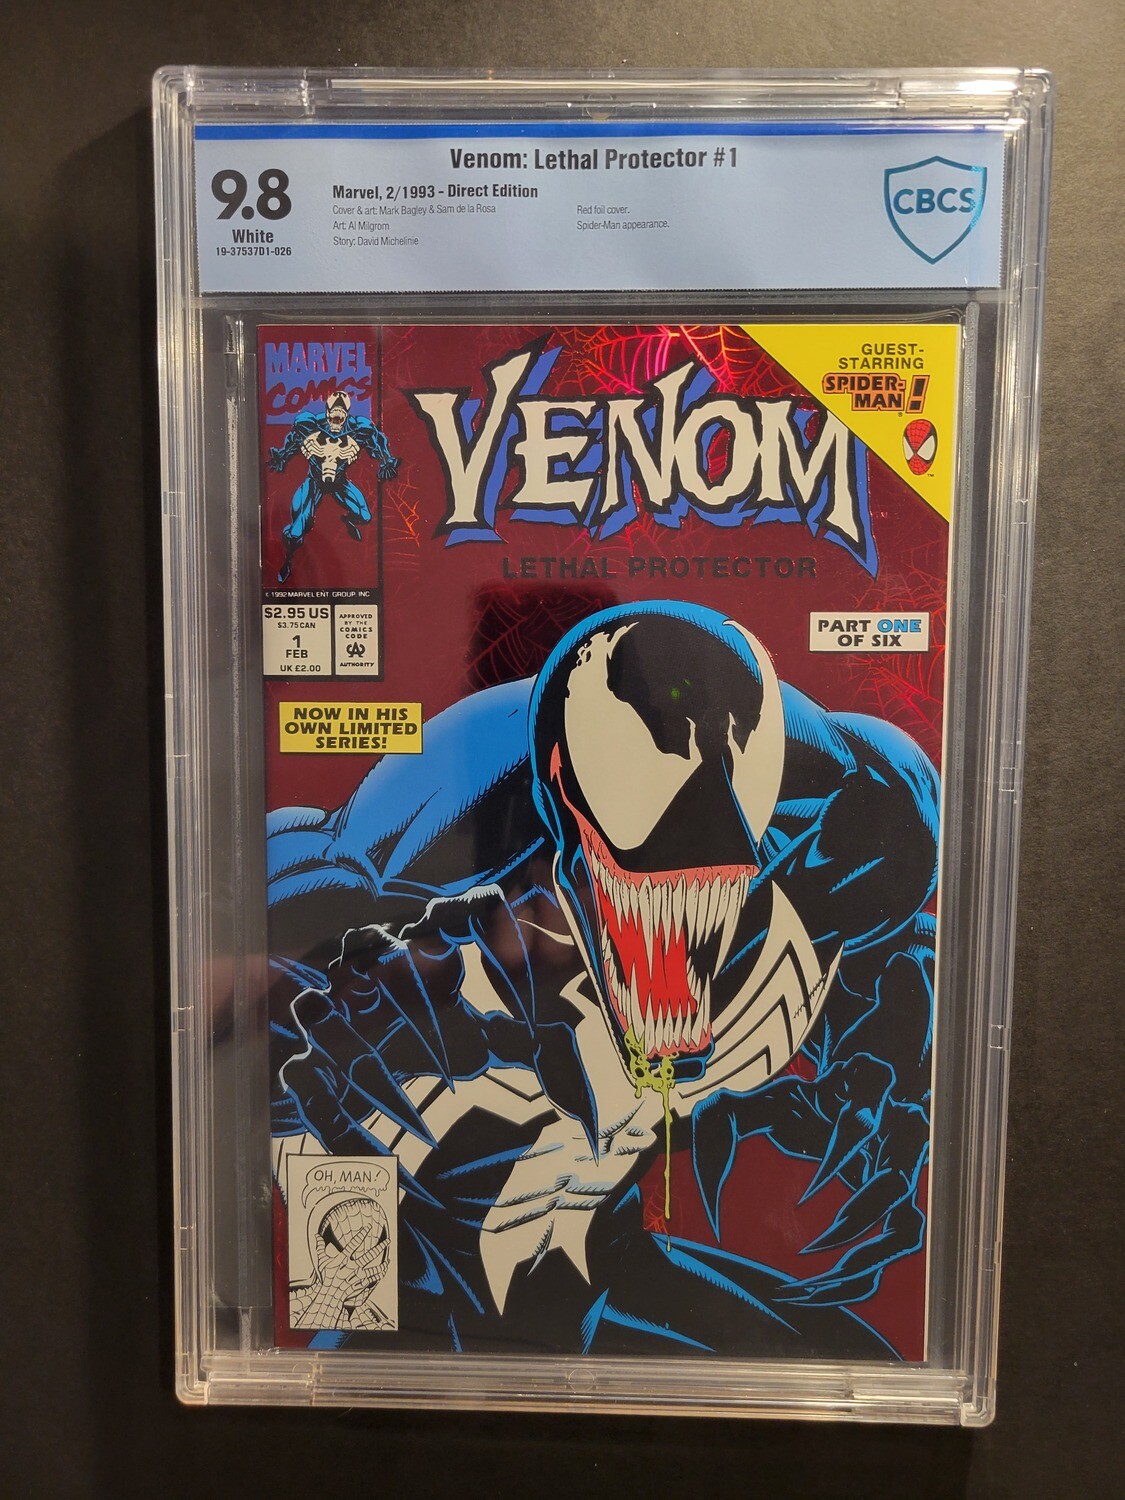 Venom Lethal Protector #1 CBCS 9.8 1st appearance of Venom in his own title